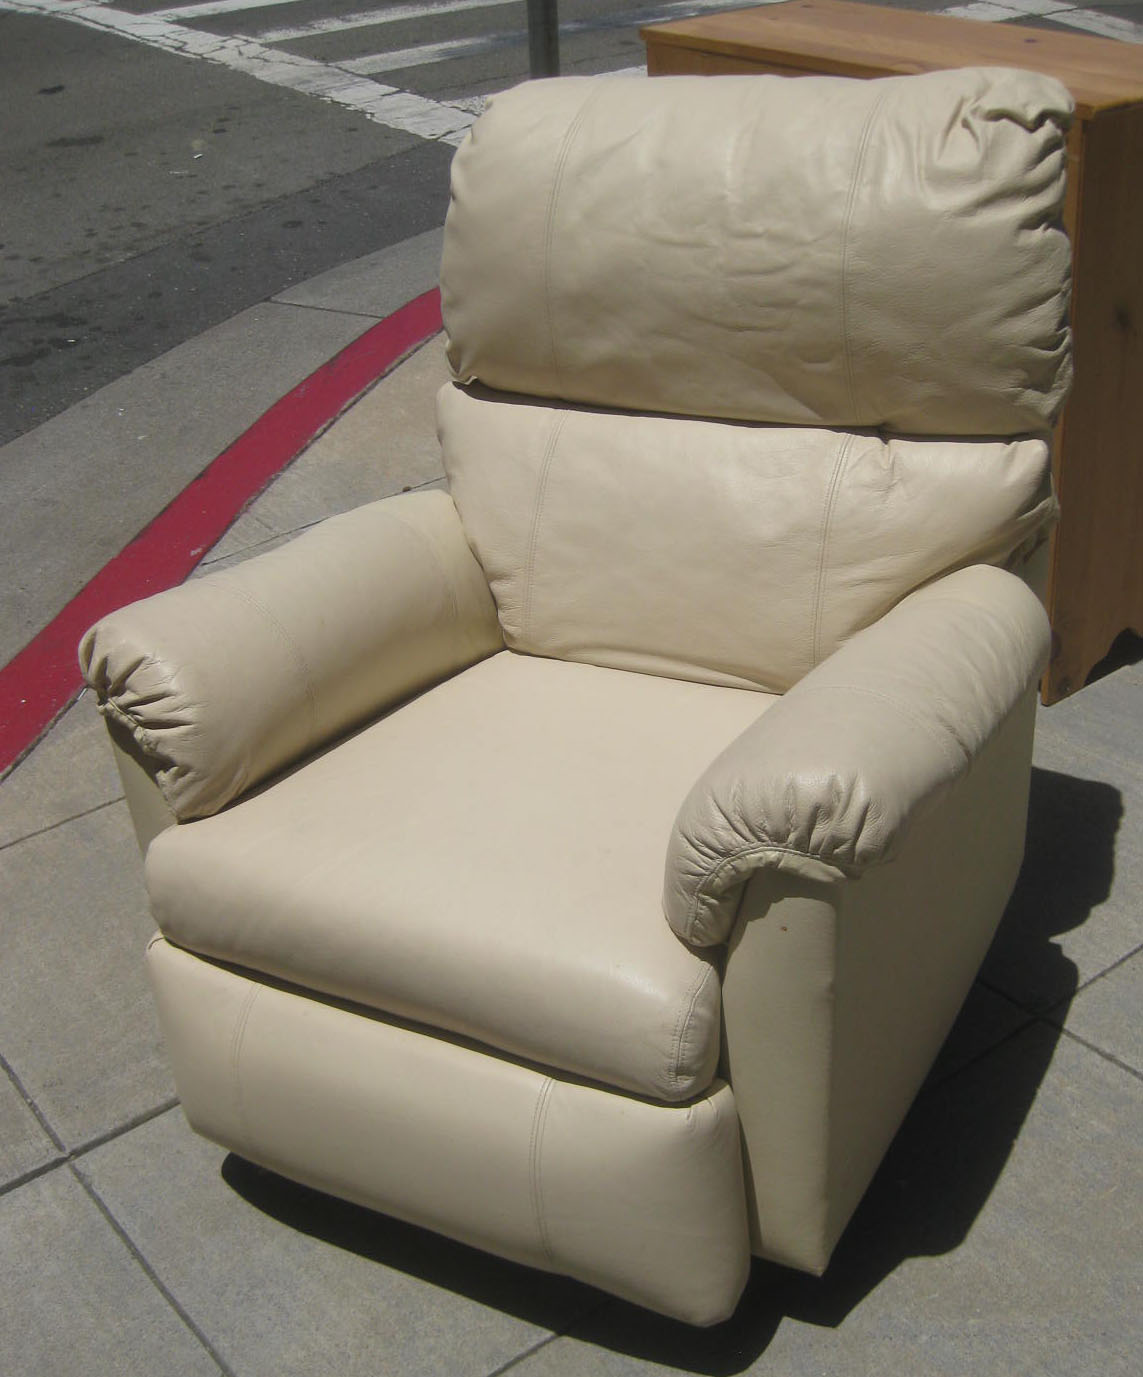 UHURU FURNITURE & COLLECTIBLES SOLD Ivory Recliner 70